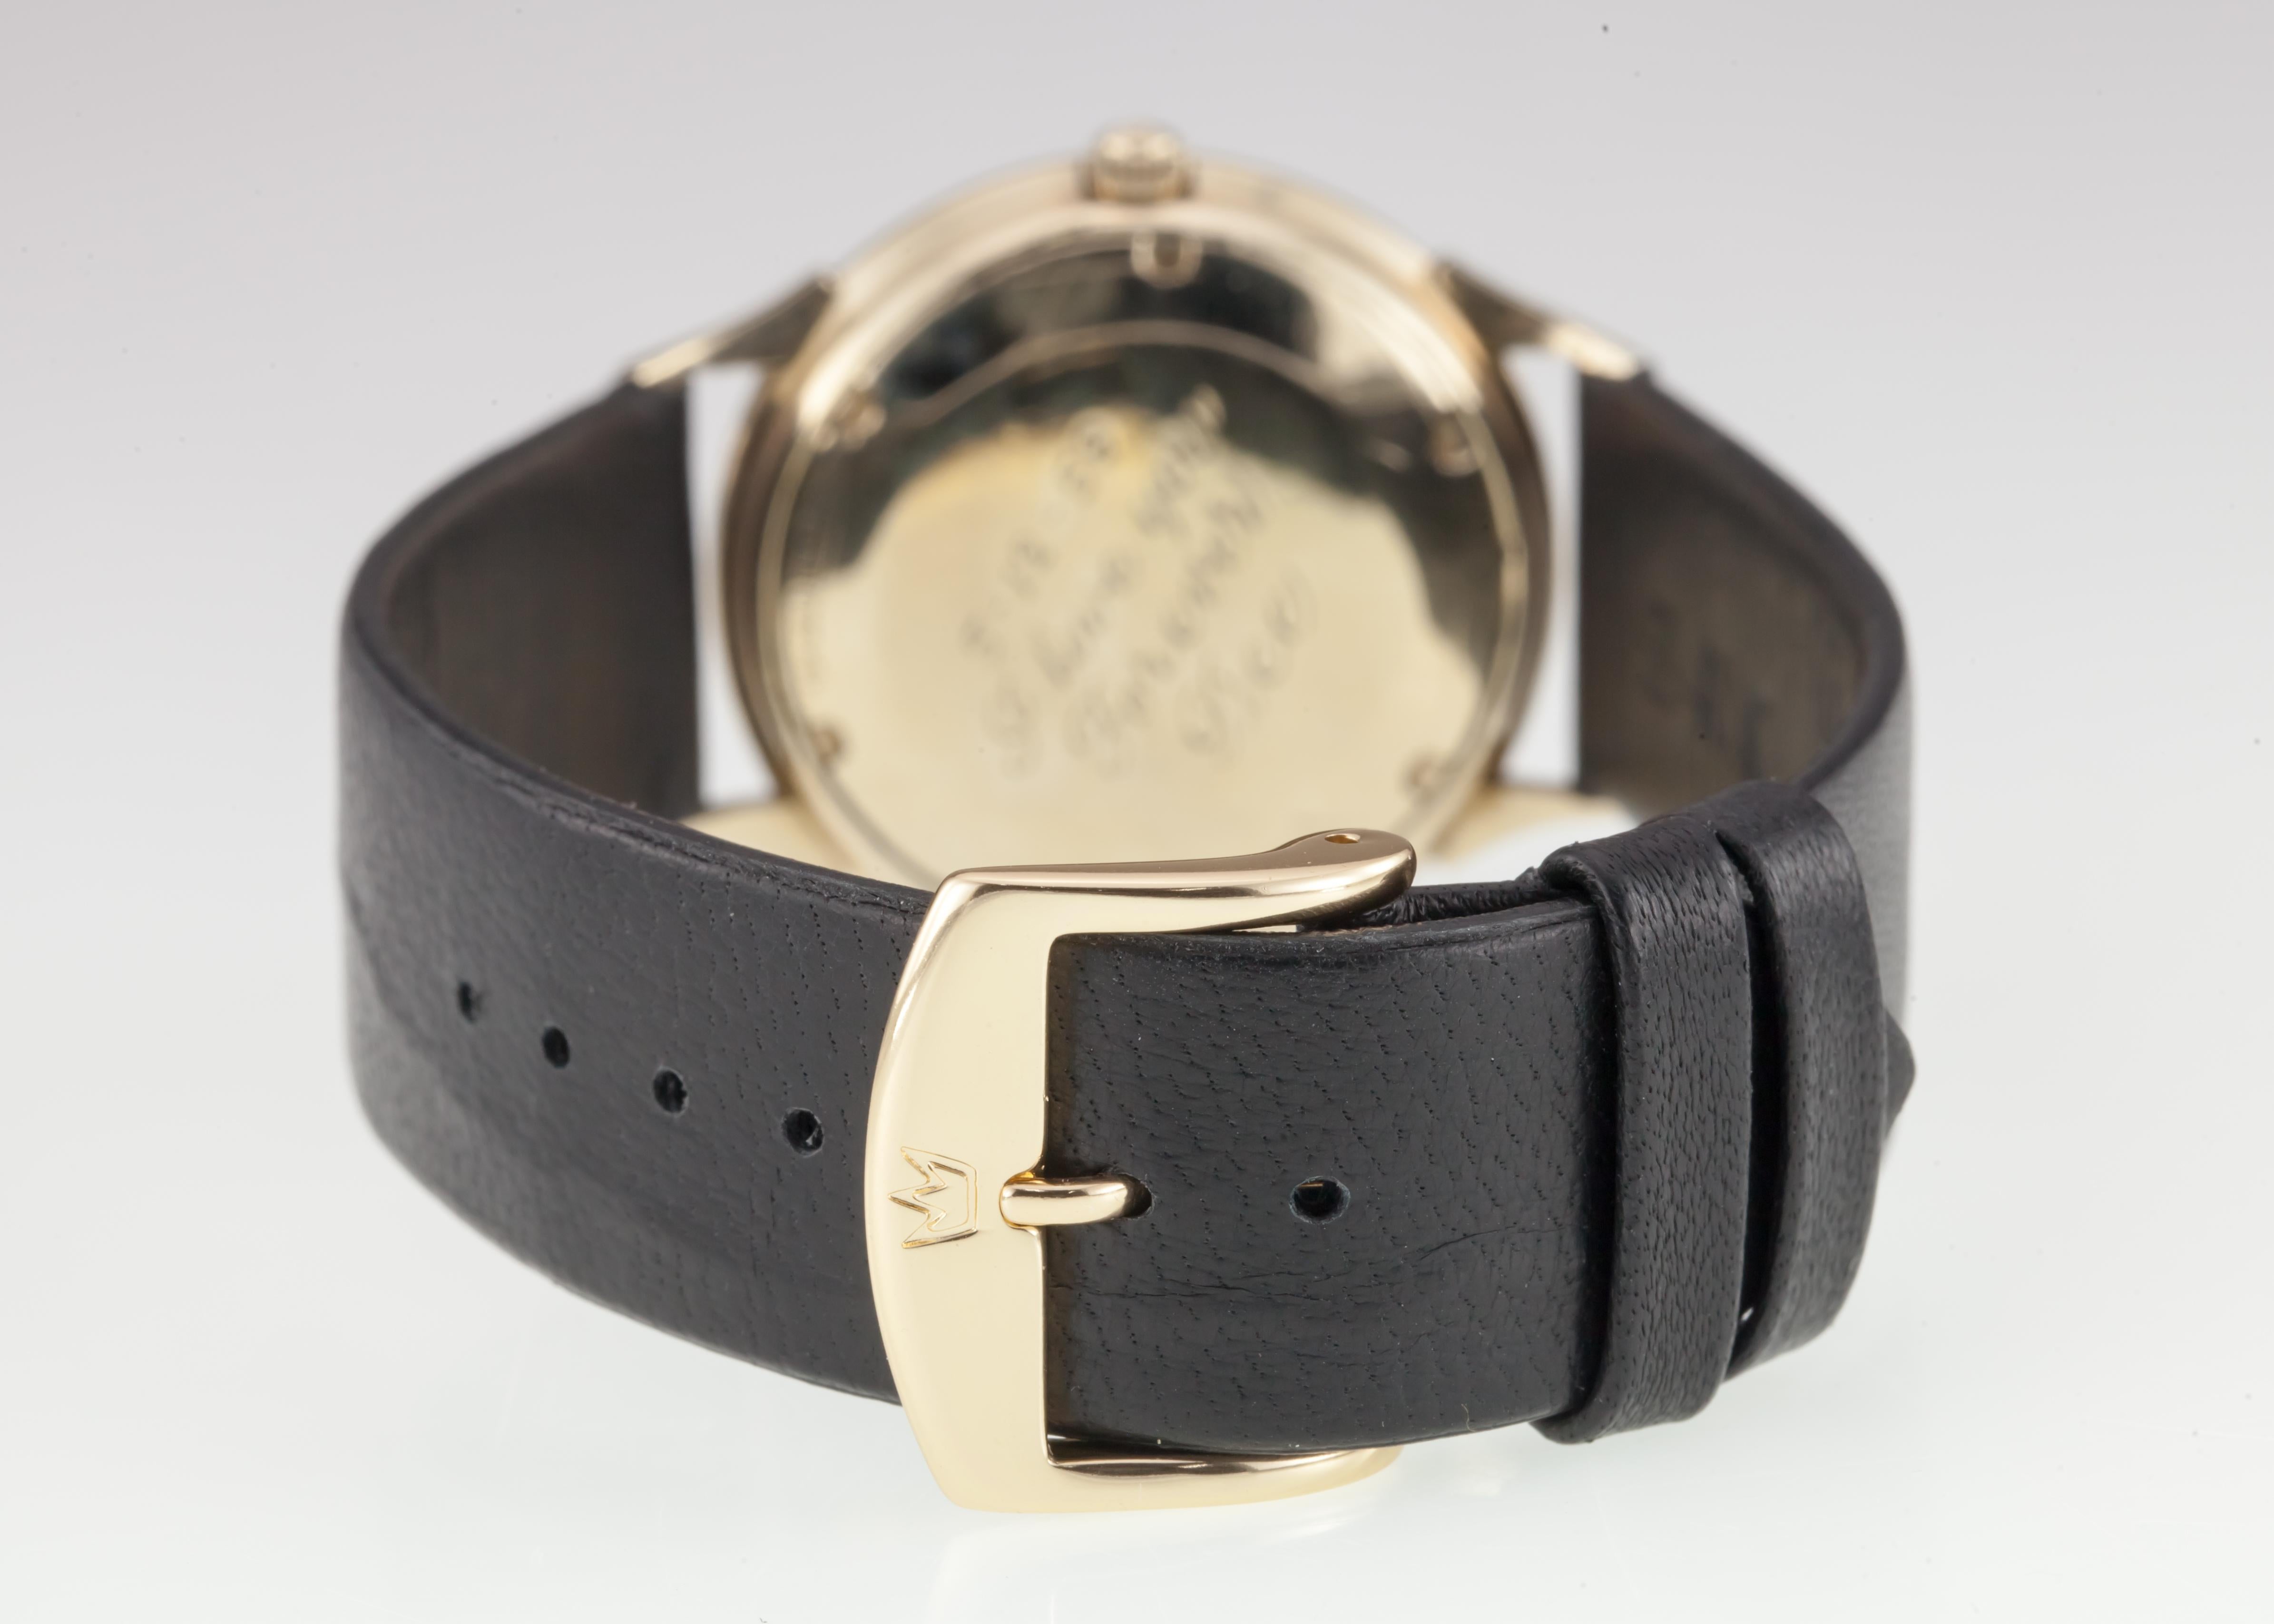 Le Coultre Men's Gold-Filled Hand-Winding Watch w/ Leather Strap Unique Hands! For Sale 1